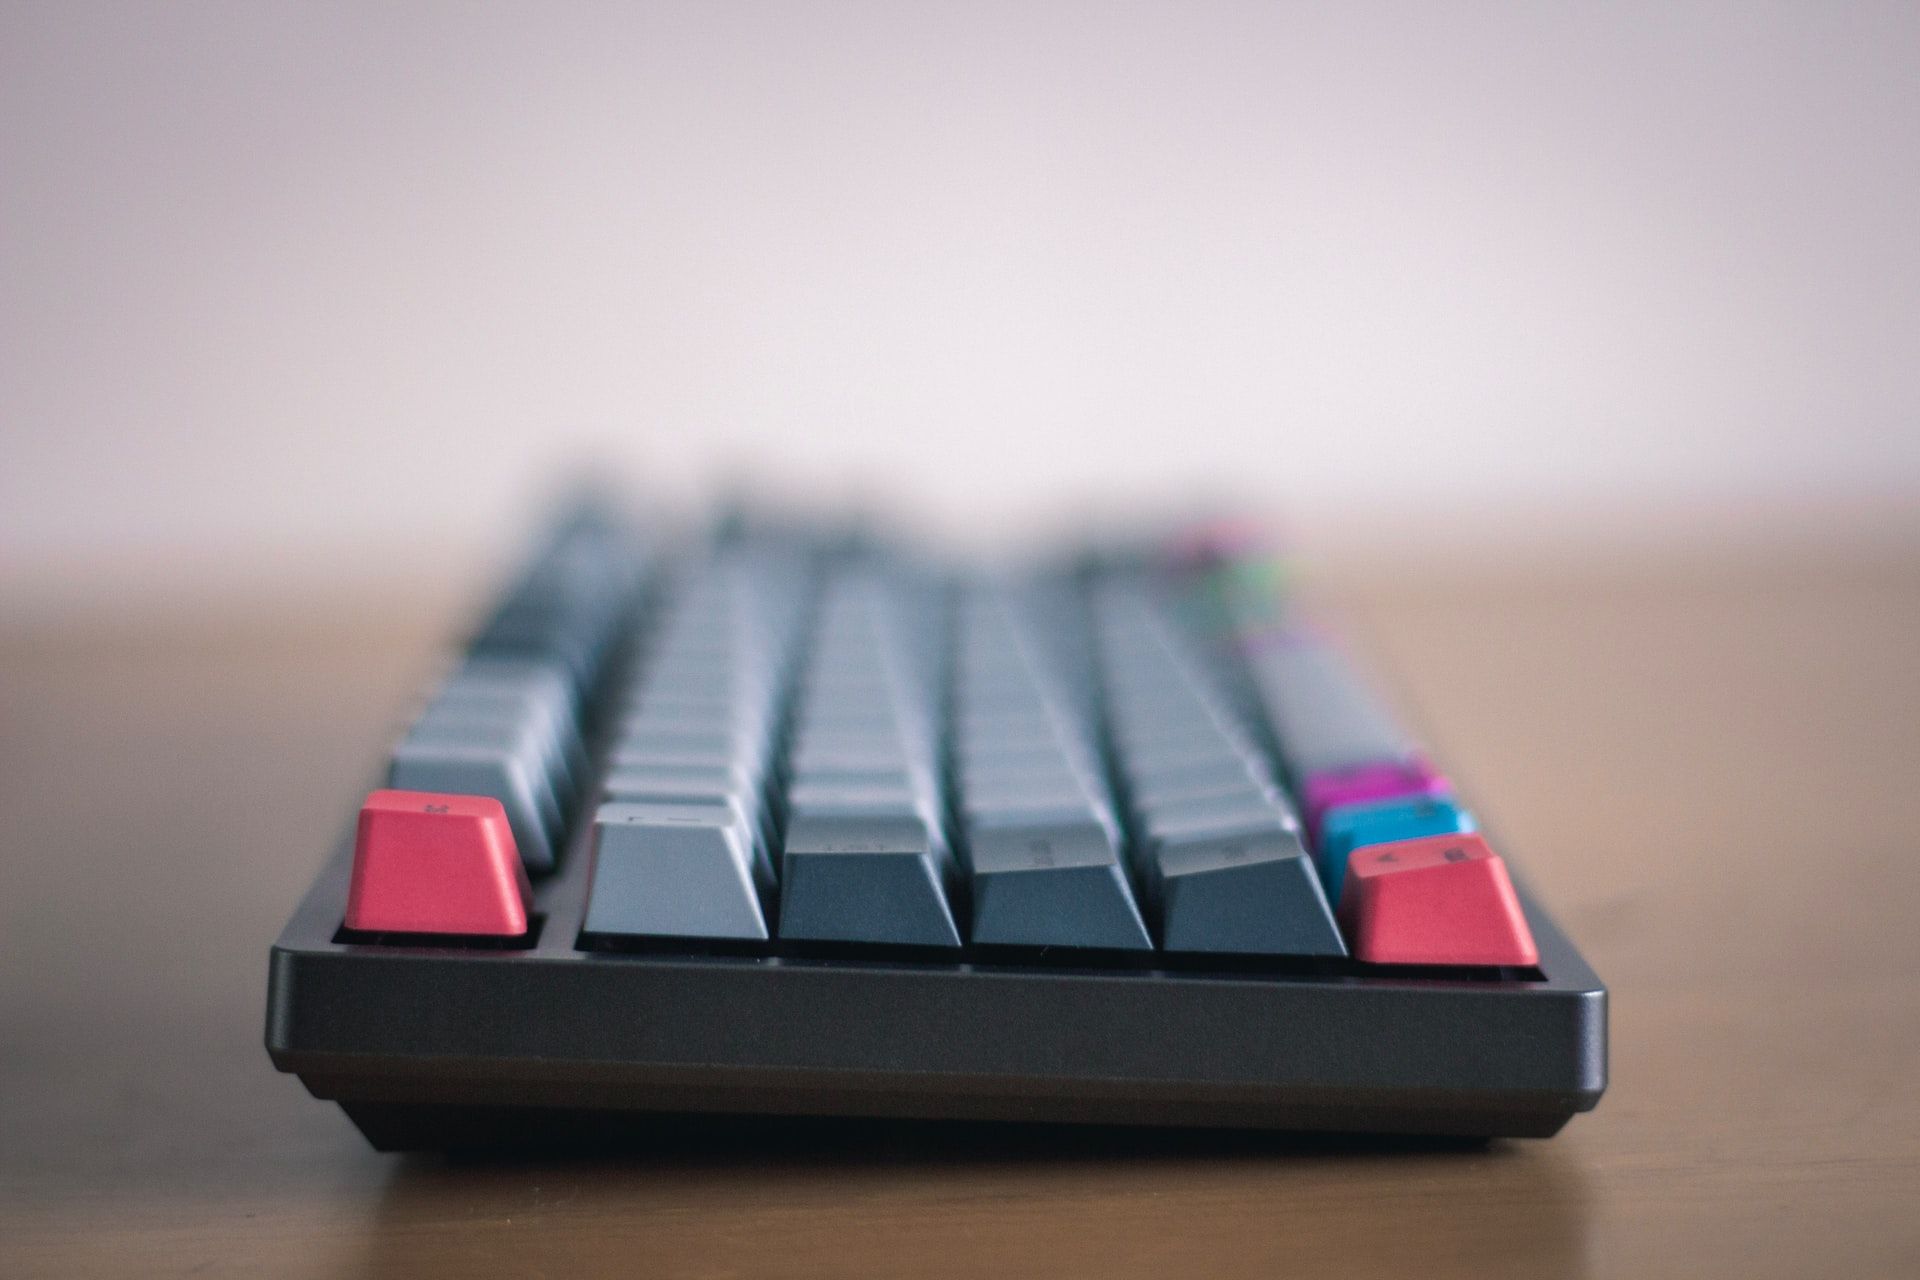 keycap profiles shown from side with colored keycaps OEM